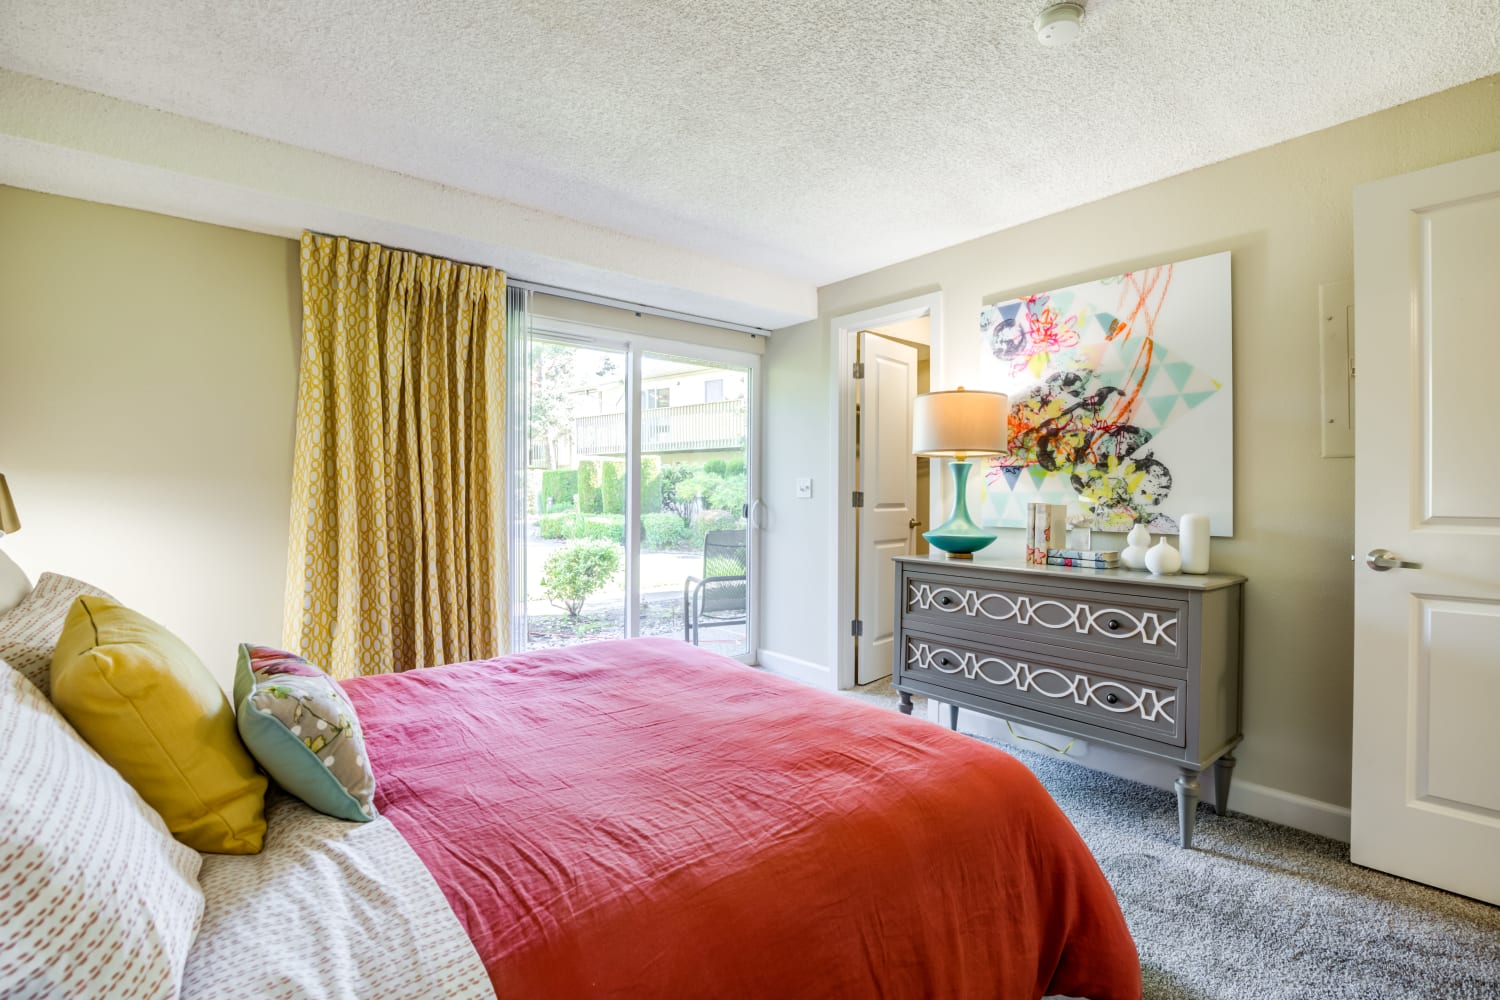 Spacious bedroom with sliding door to patio space at Edgewood Park Apartments in Bellevue, Washington